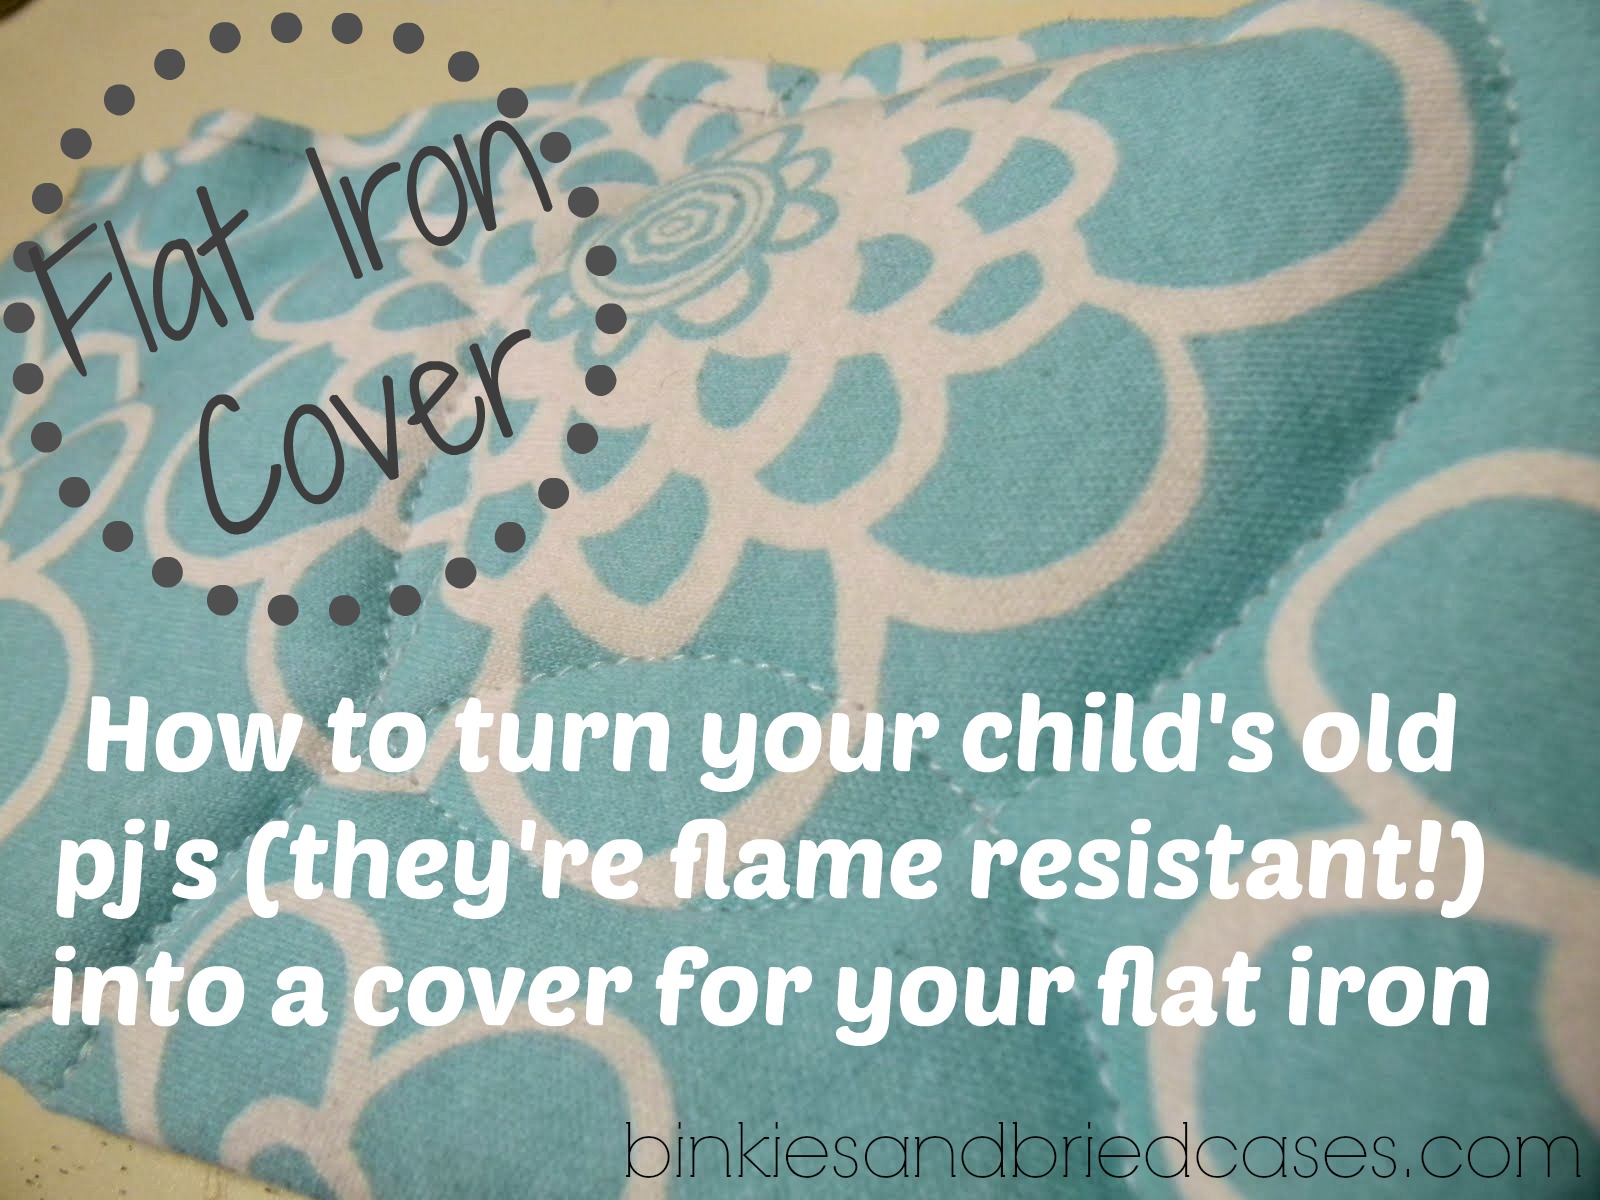 Turn children's pjs into a flat iron cover